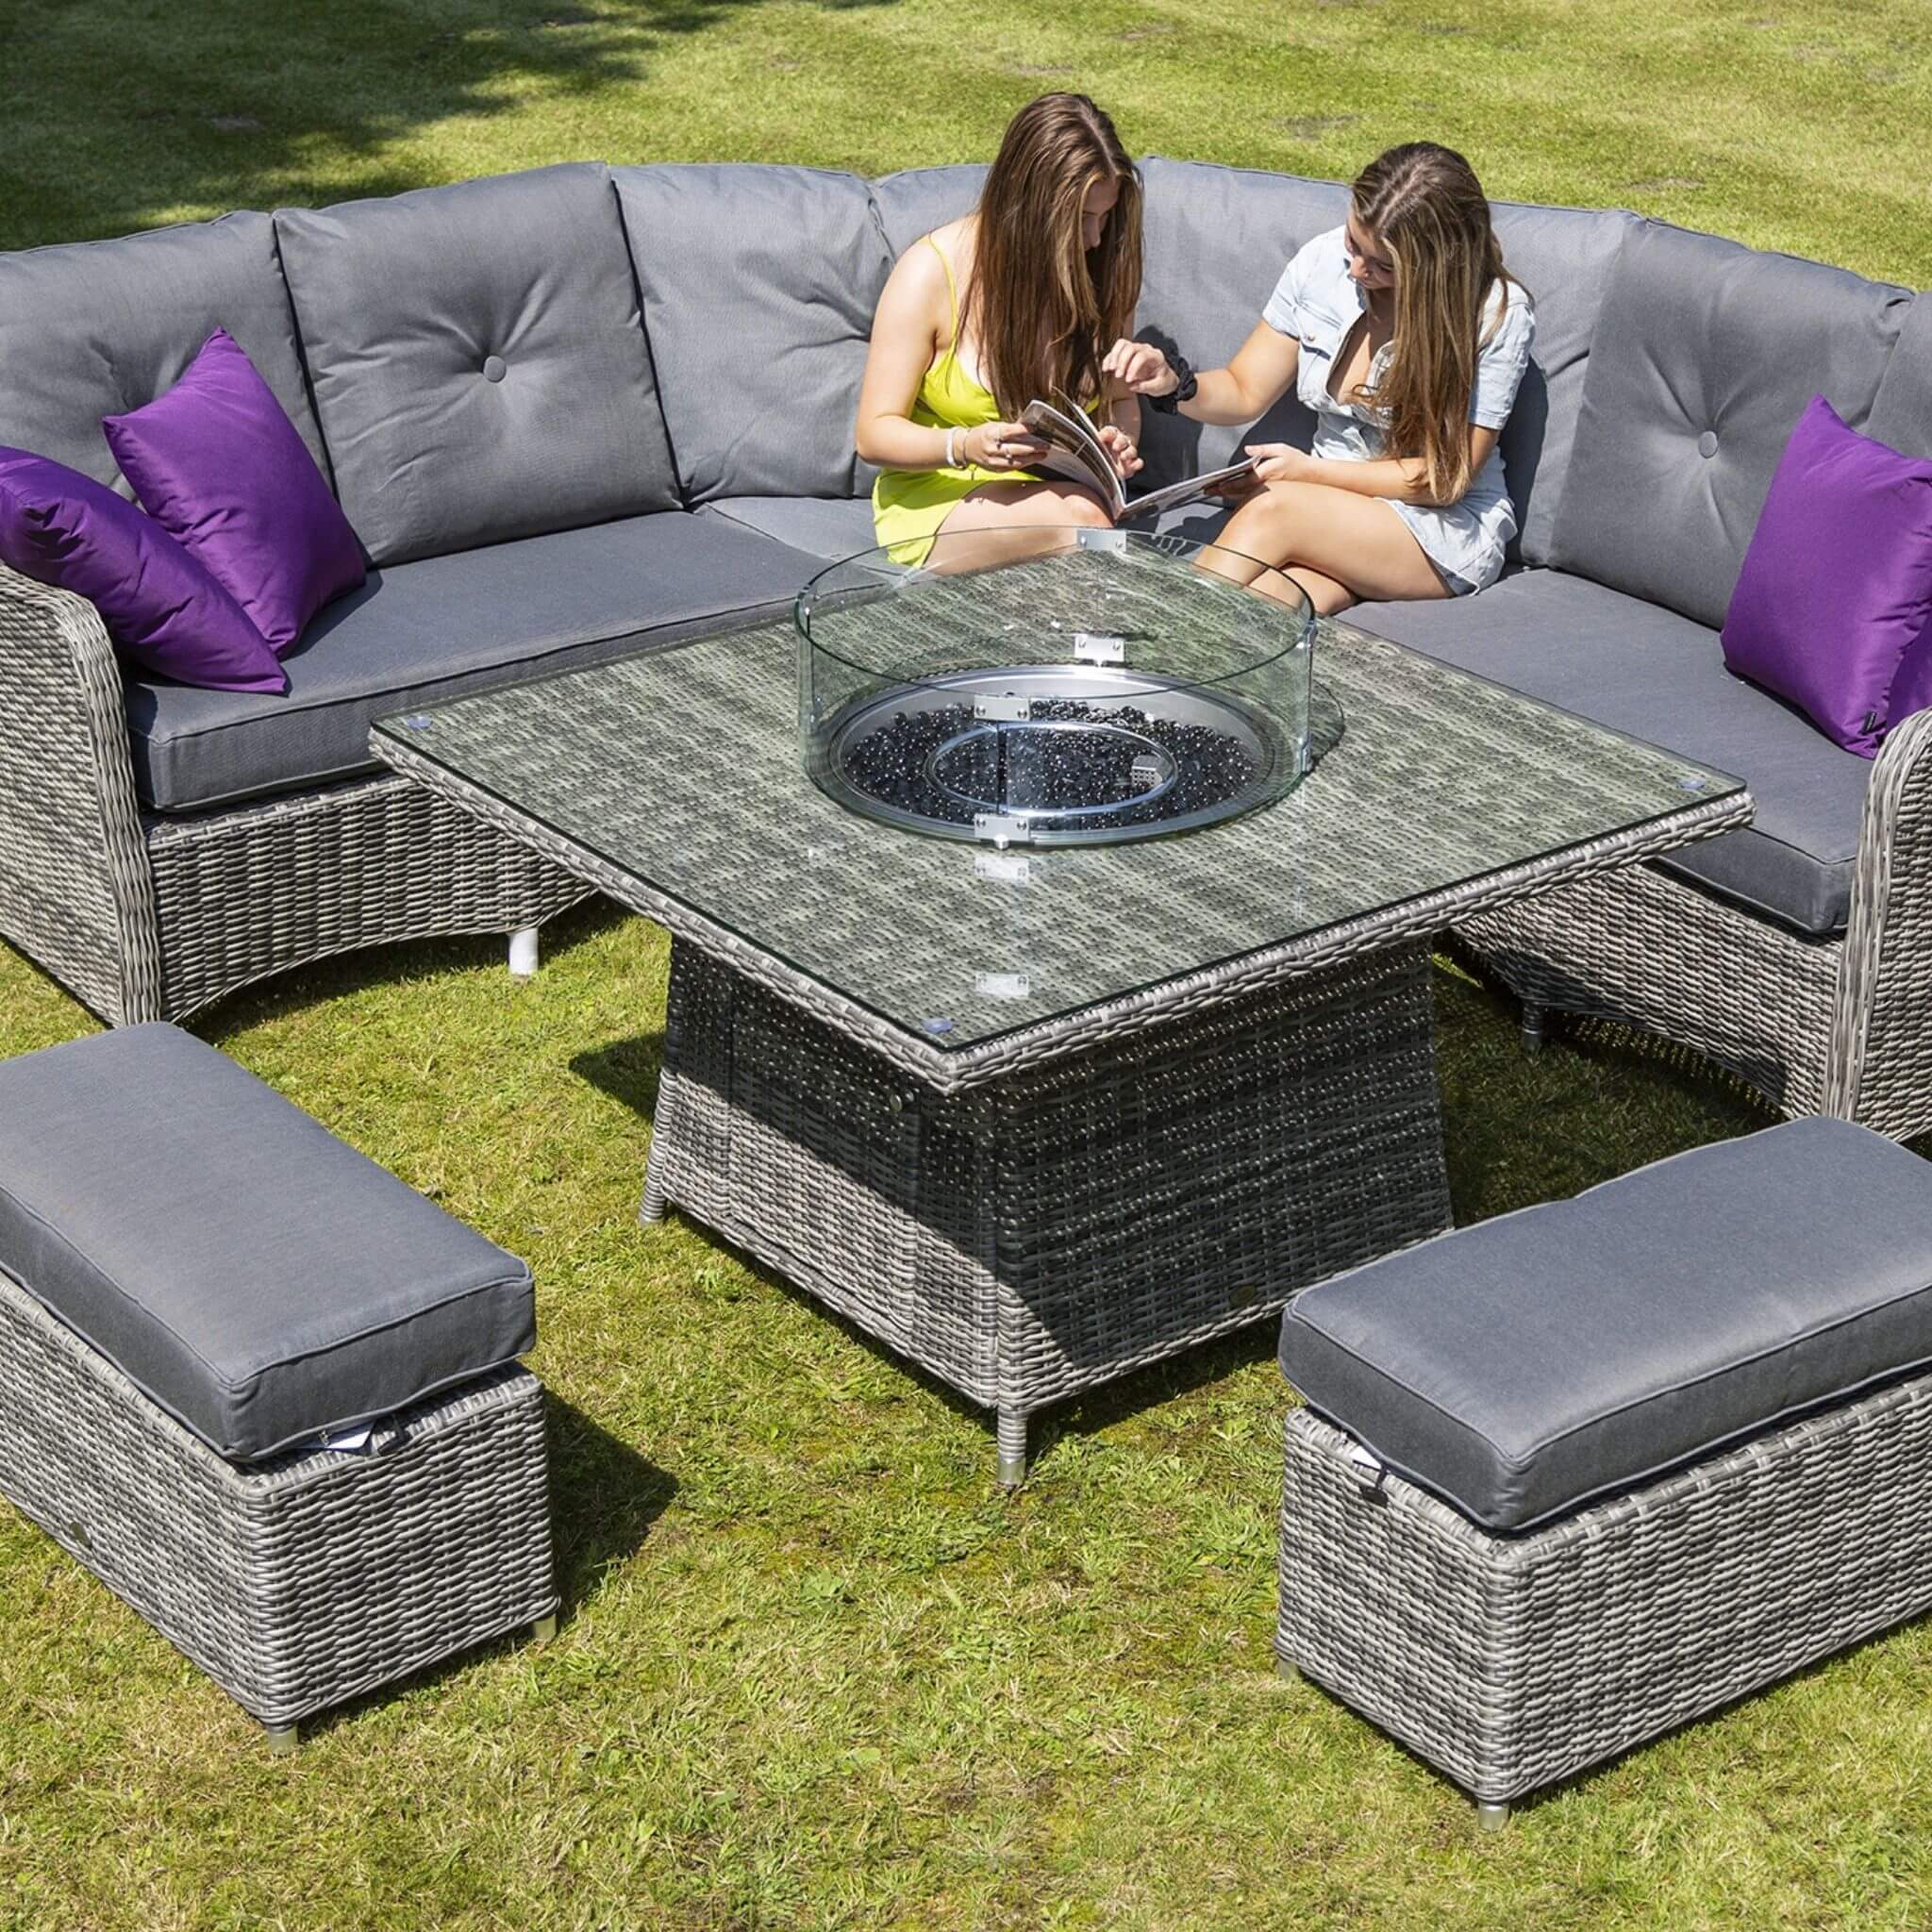 Katie Blake Seville 8 Seat Rattan Corner Dining Set with Fire Pit Table, 2 Footstools & Square Table